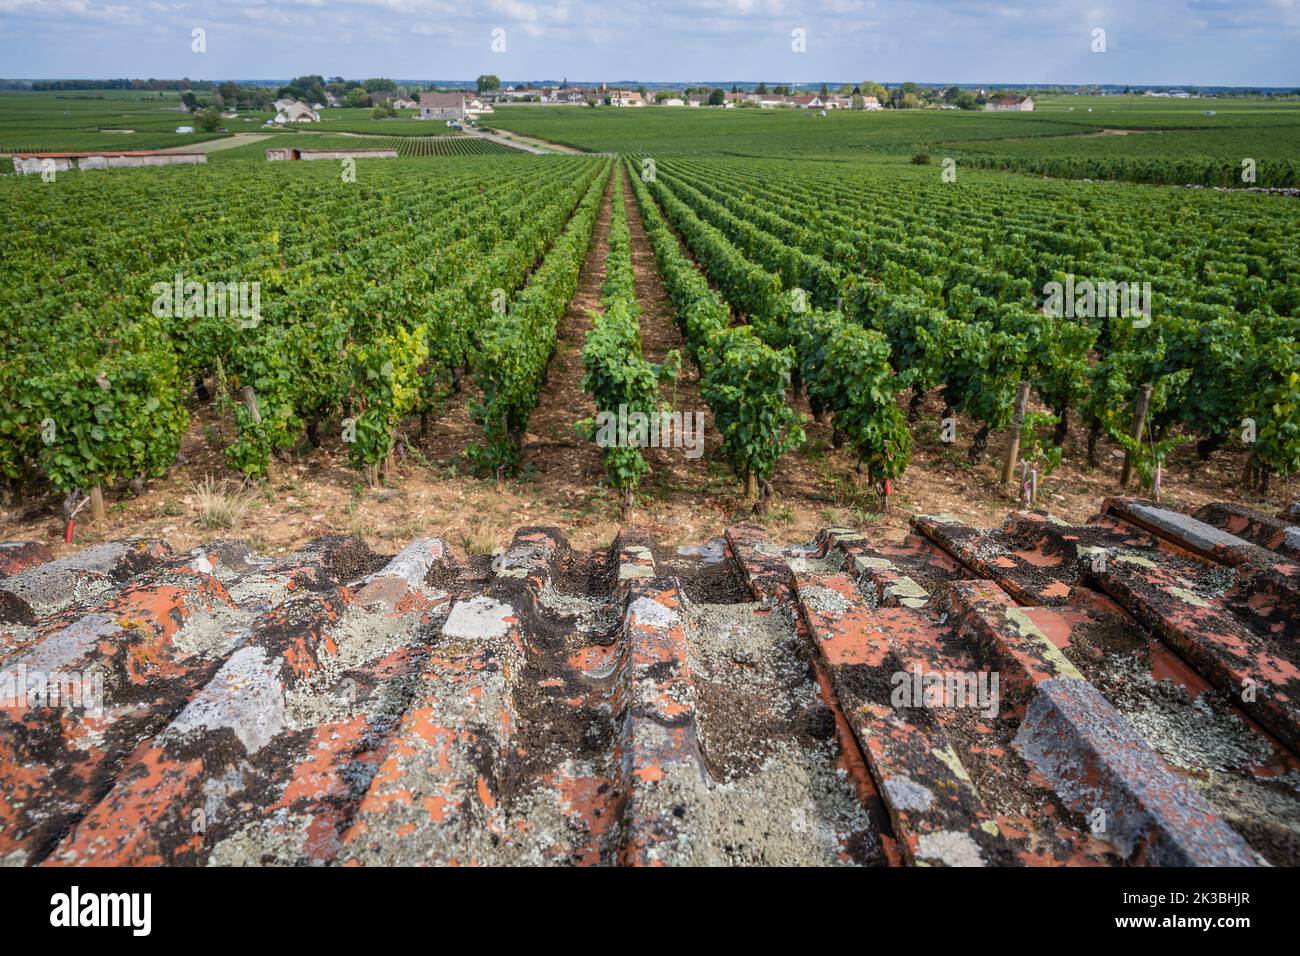 The vineyards of Burgundy, the famous wine village of Meursault, France. Stock Photo